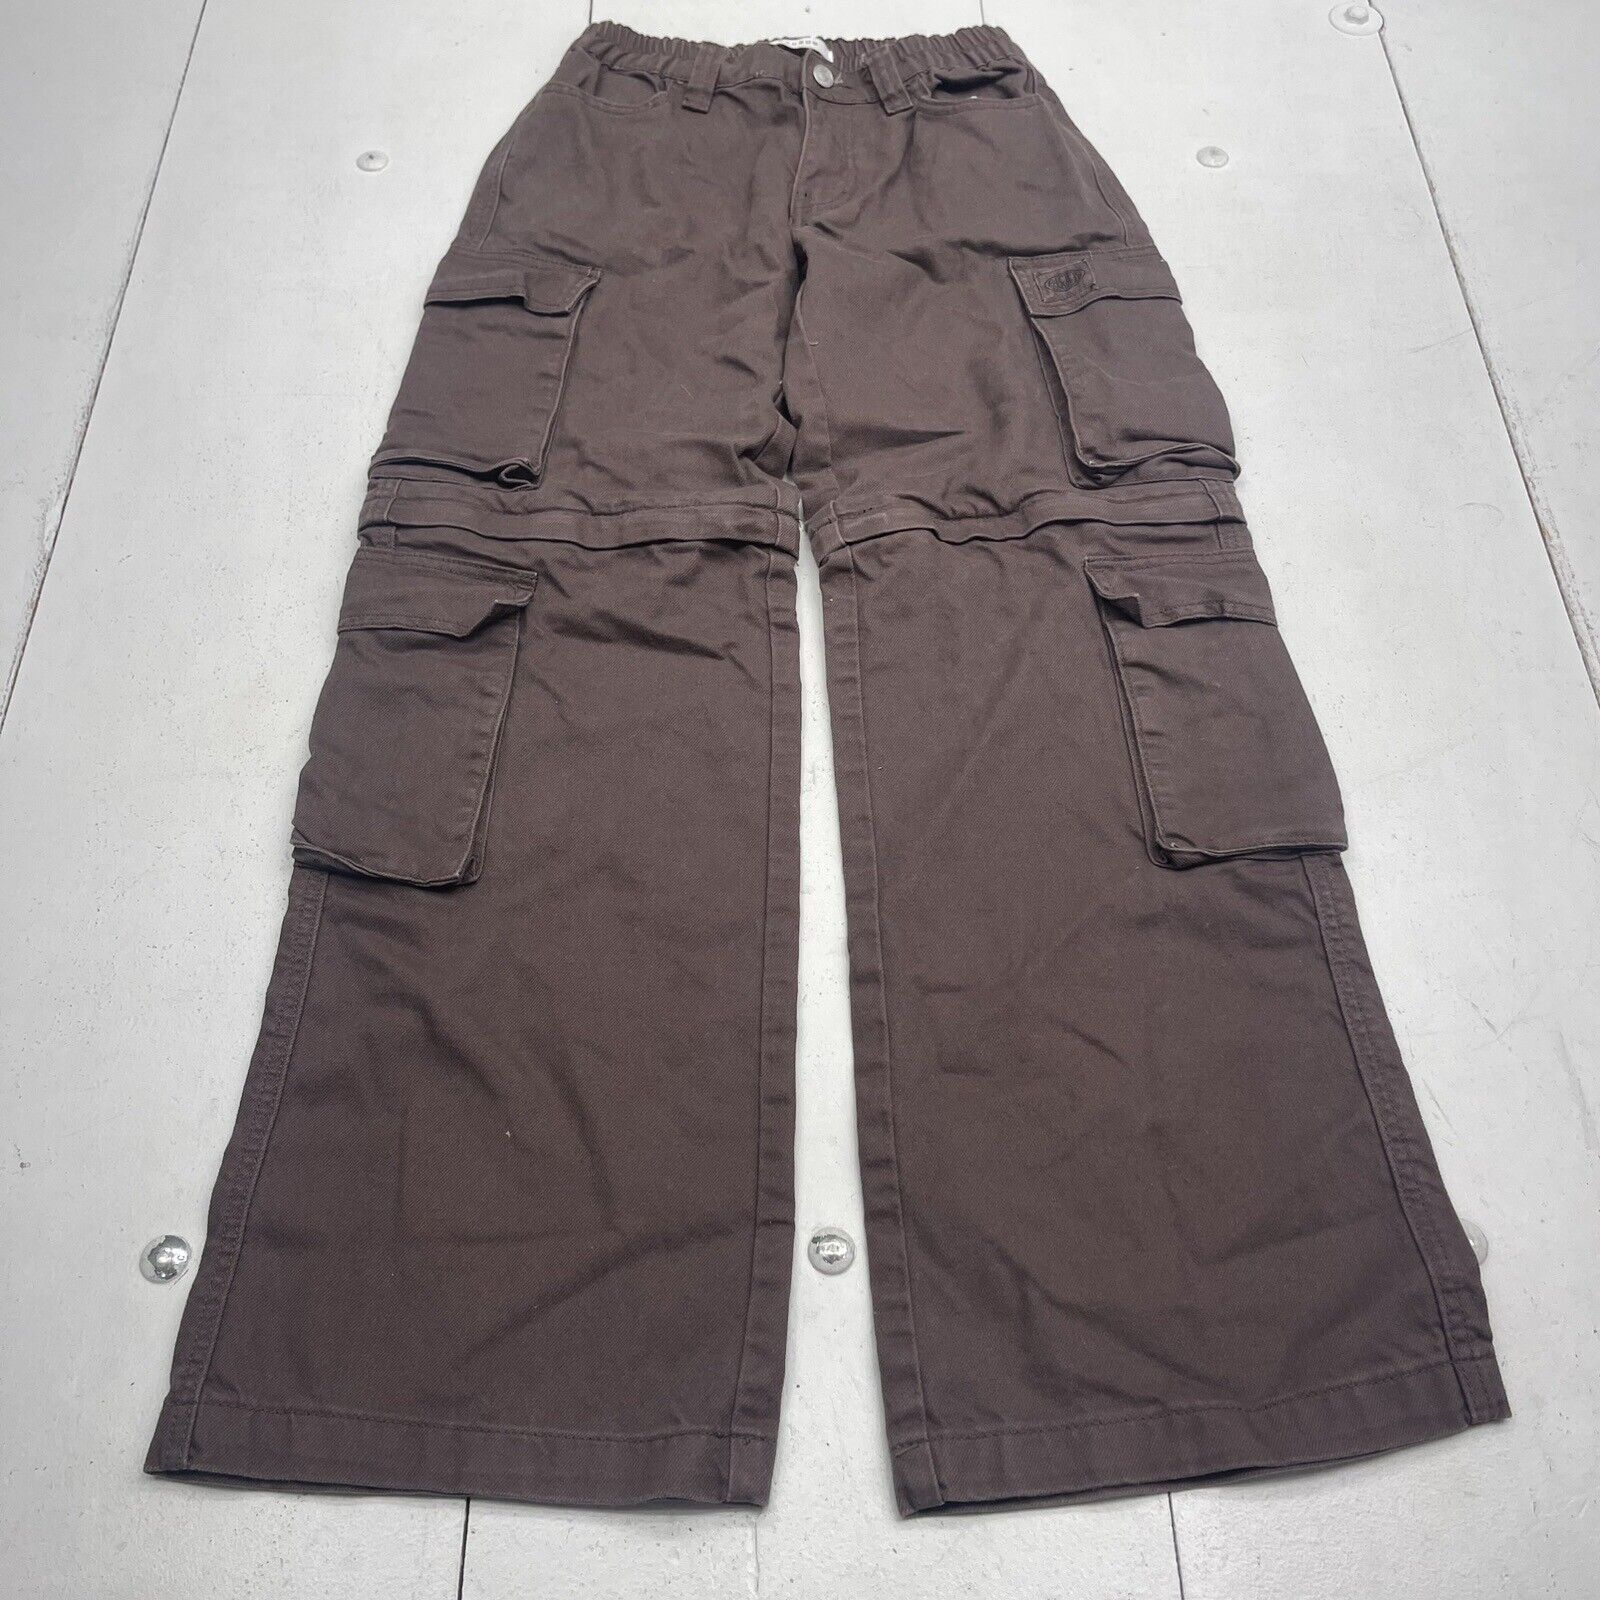 Vintage Brown Baggy Jeans For Women With Pockets Streetwear Style